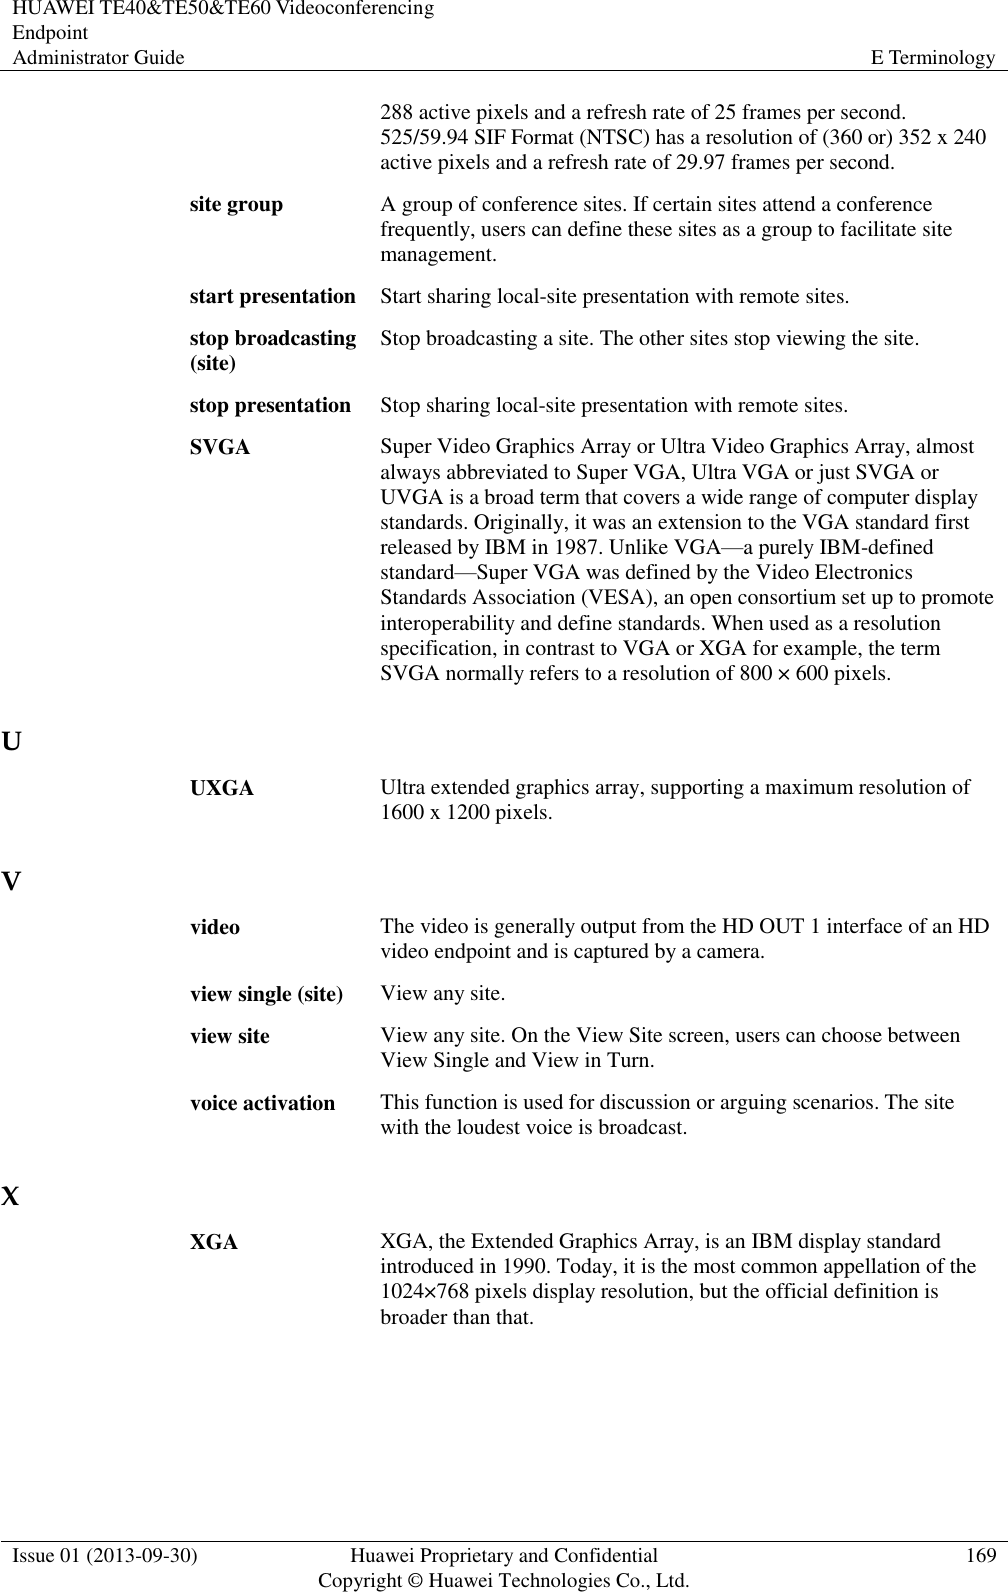 HUAWEI TE40&amp;TE50&amp;TE60 Videoconferencing Endpoint Administrator Guide E Terminology  Issue 01 (2013-09-30) Huawei Proprietary and Confidential                                     Copyright © Huawei Technologies Co., Ltd. 169  288 active pixels and a refresh rate of 25 frames per second. 525/59.94 SIF Format (NTSC) has a resolution of (360 or) 352 x 240 active pixels and a refresh rate of 29.97 frames per second. site group A group of conference sites. If certain sites attend a conference frequently, users can define these sites as a group to facilitate site management. start presentation Start sharing local-site presentation with remote sites. stop broadcasting (site) Stop broadcasting a site. The other sites stop viewing the site. stop presentation Stop sharing local-site presentation with remote sites. SVGA Super Video Graphics Array or Ultra Video Graphics Array, almost always abbreviated to Super VGA, Ultra VGA or just SVGA or UVGA is a broad term that covers a wide range of computer display standards. Originally, it was an extension to the VGA standard first released by IBM in 1987. Unlike VGA—a purely IBM-defined standard—Super VGA was defined by the Video Electronics Standards Association (VESA), an open consortium set up to promote interoperability and define standards. When used as a resolution specification, in contrast to VGA or XGA for example, the term SVGA normally refers to a resolution of 800 × 600 pixels. U UXGA Ultra extended graphics array, supporting a maximum resolution of 1600 x 1200 pixels. V video The video is generally output from the HD OUT 1 interface of an HD video endpoint and is captured by a camera. view single (site) View any site. view site View any site. On the View Site screen, users can choose between View Single and View in Turn. voice activation This function is used for discussion or arguing scenarios. The site with the loudest voice is broadcast. X XGA XGA, the Extended Graphics Array, is an IBM display standard introduced in 1990. Today, it is the most common appellation of the 1024×768 pixels display resolution, but the official definition is broader than that. 